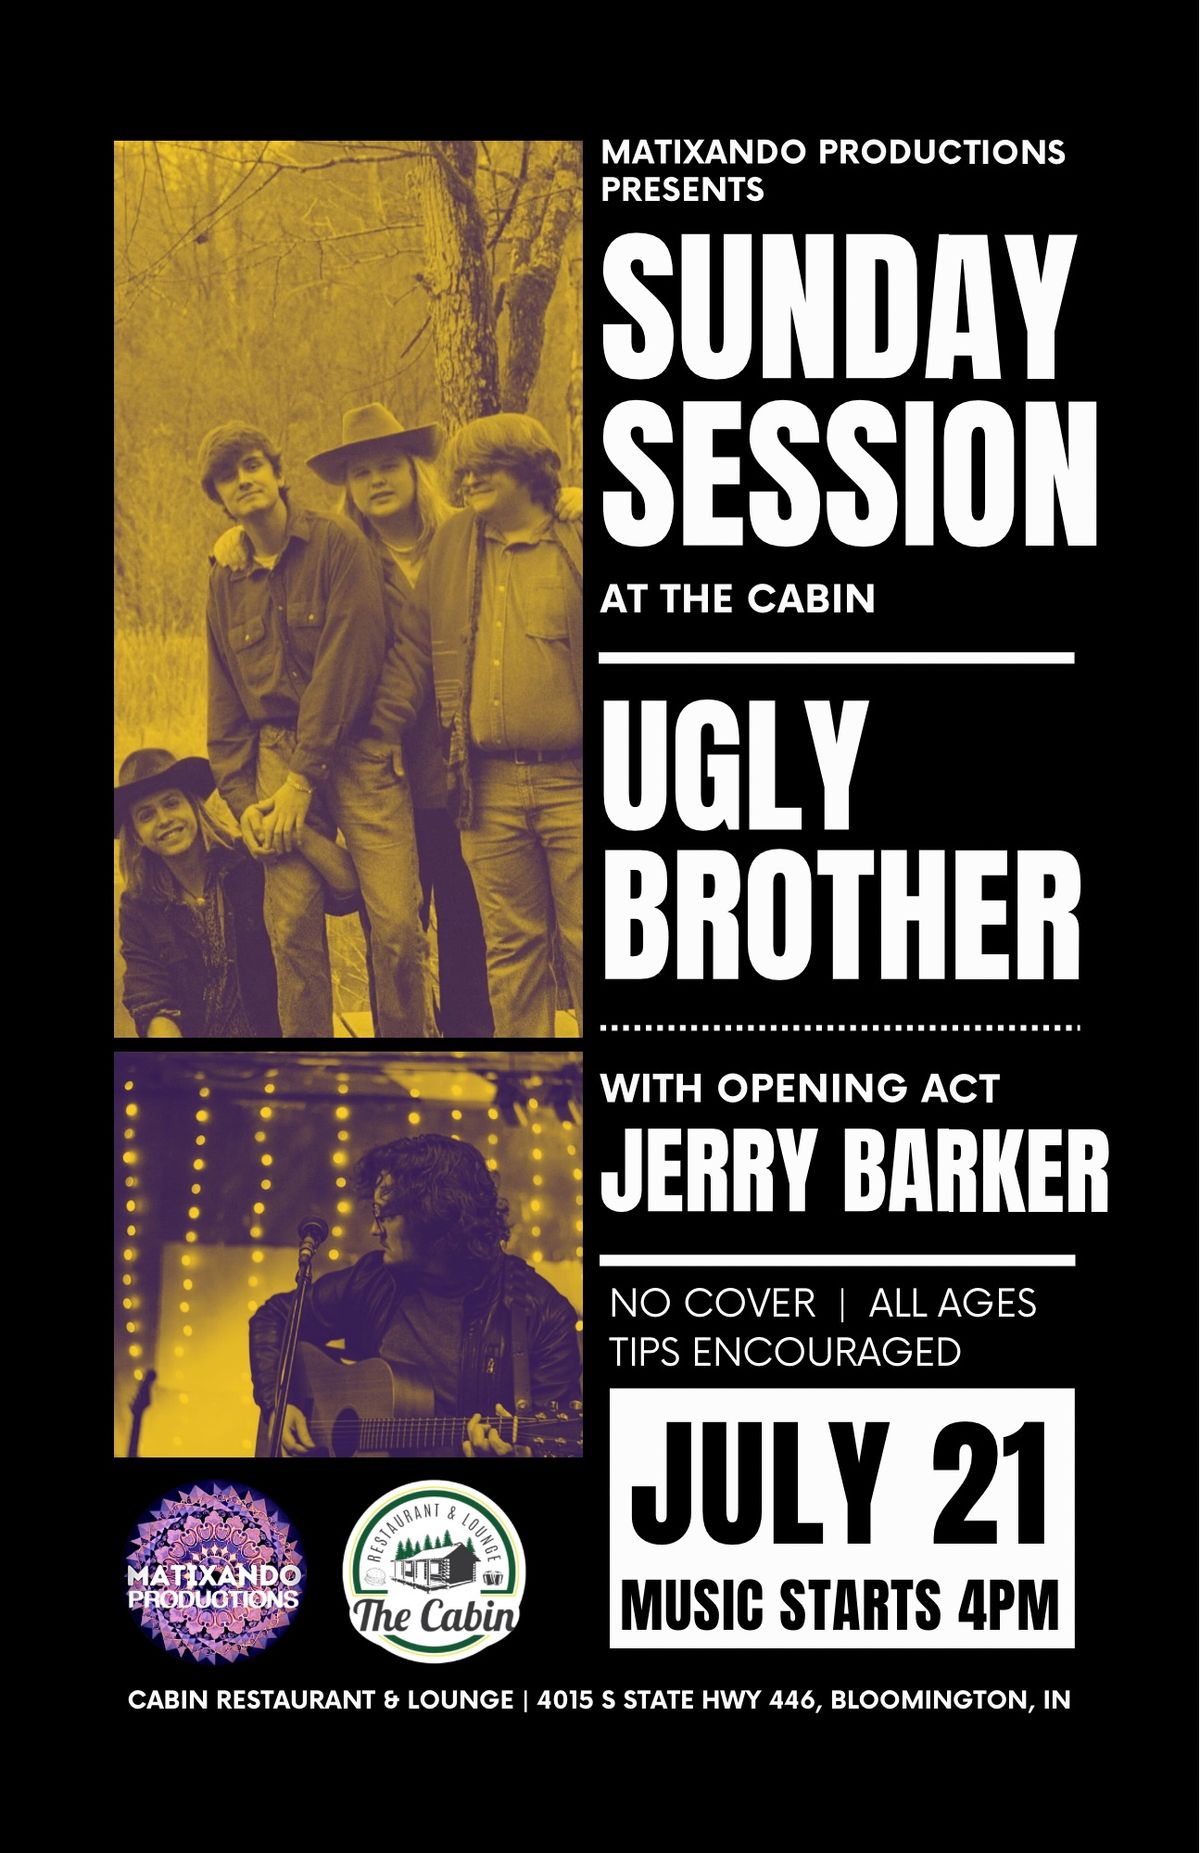 Sunday Sessions at The Cabin Ugly Brother &  Jerry Barker 